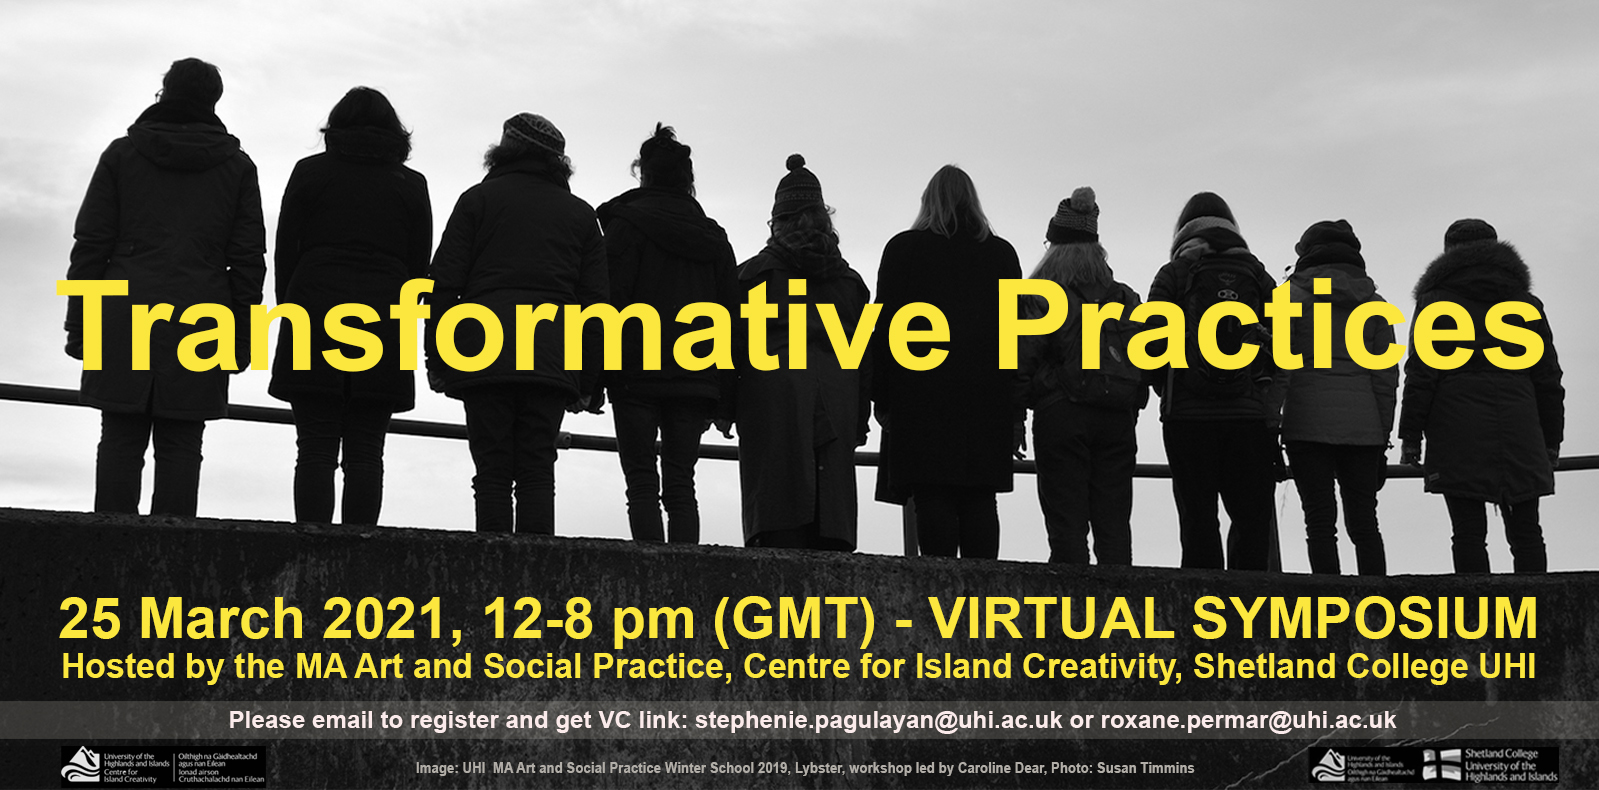 Virtual Symposium - Transformative Practices: Listening and Being Heard